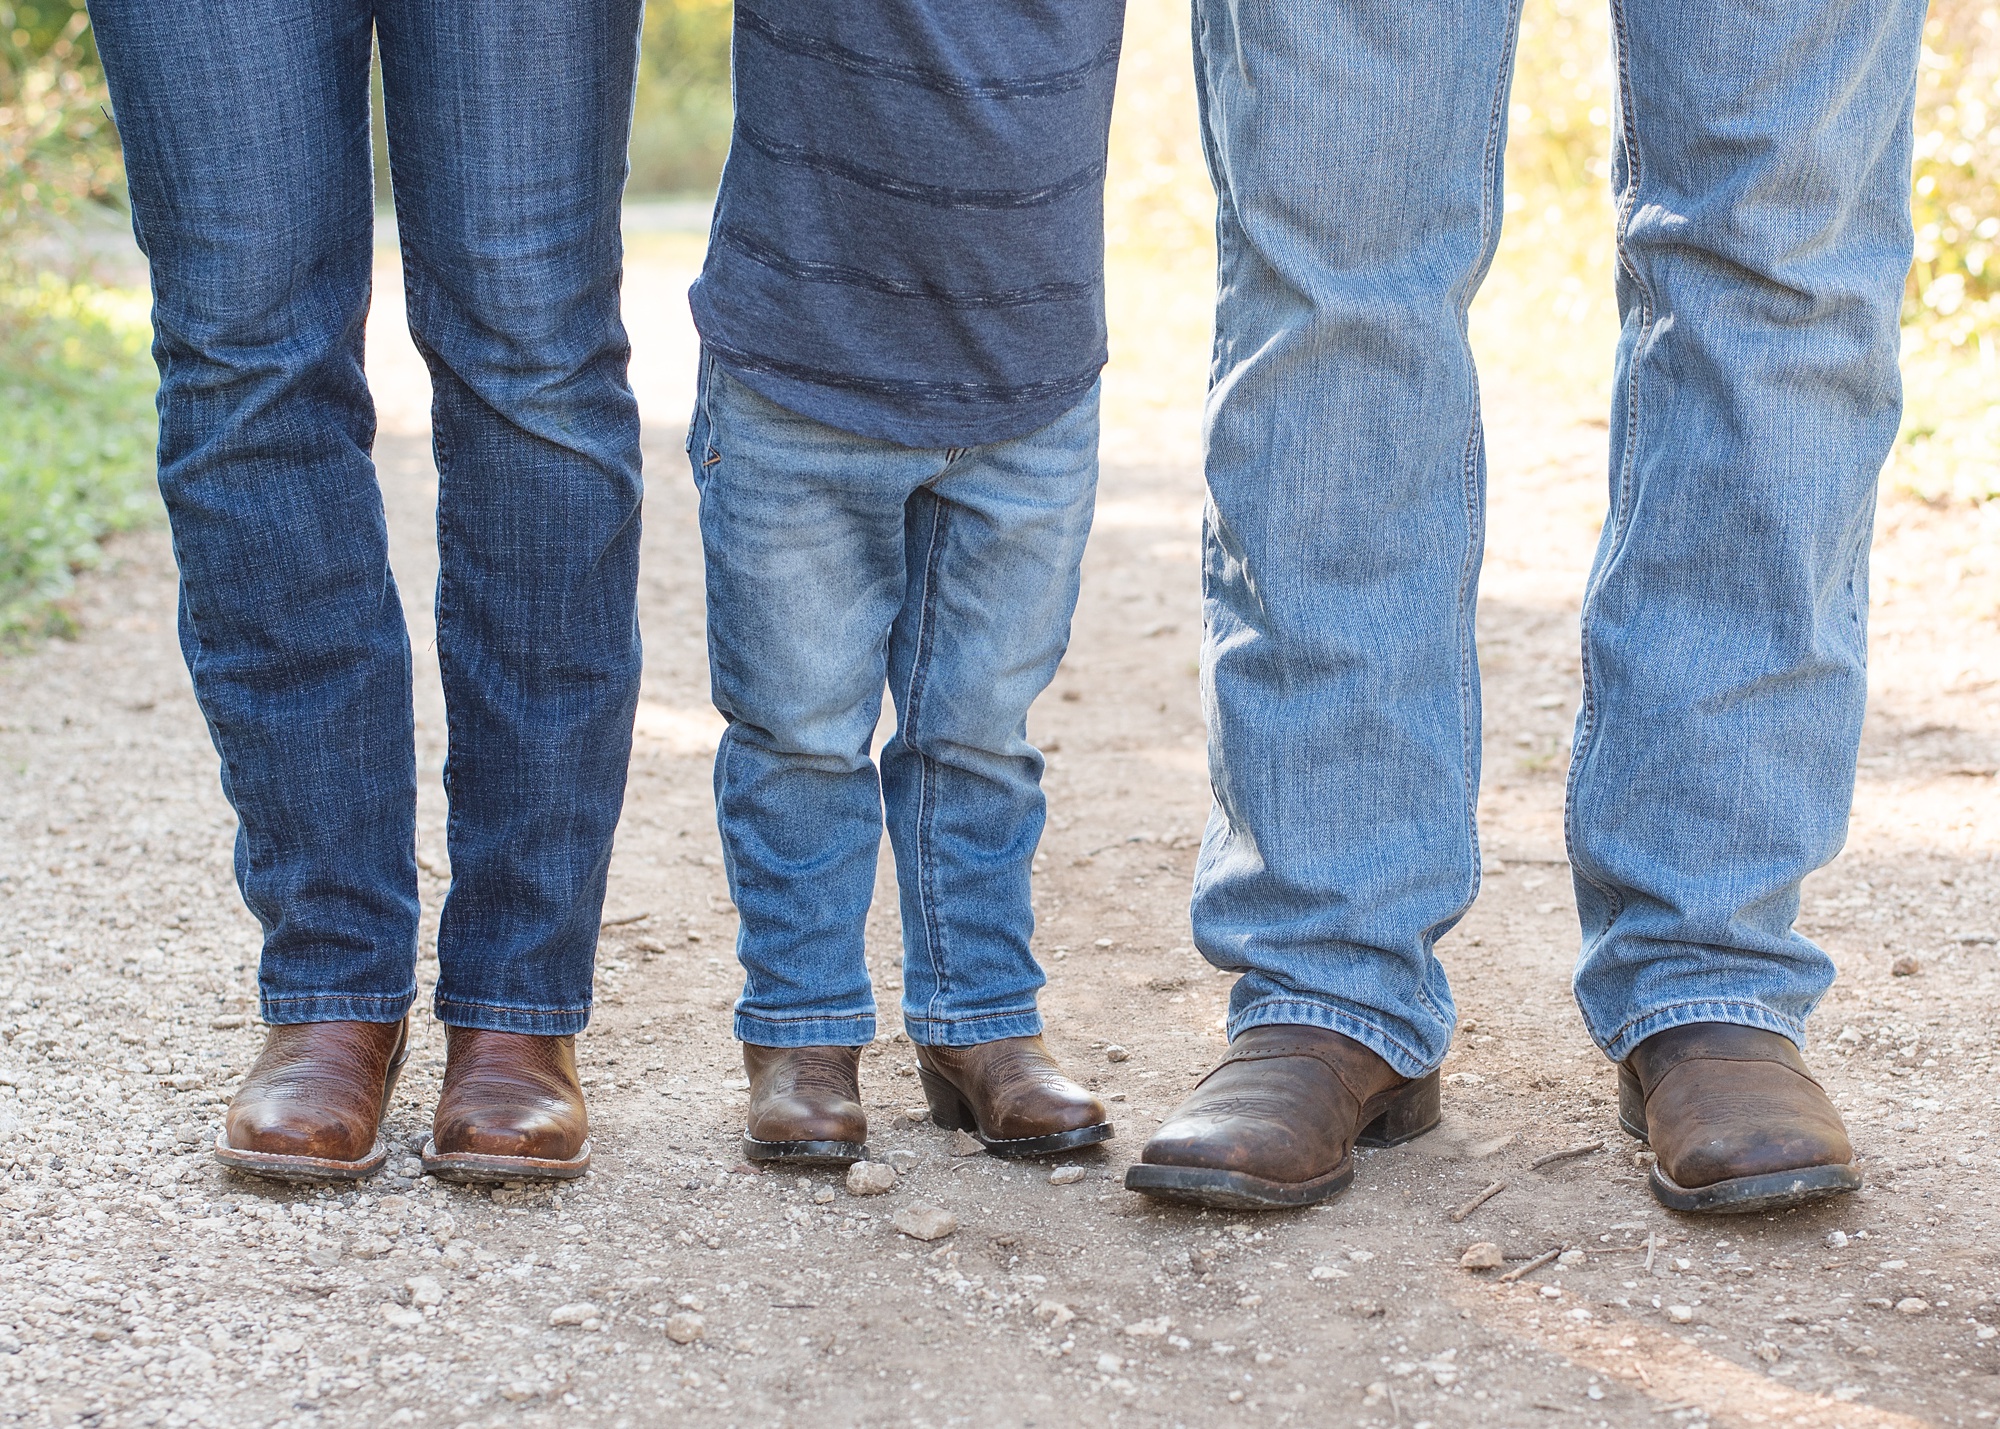 son stands between parents wearing cowboy boots